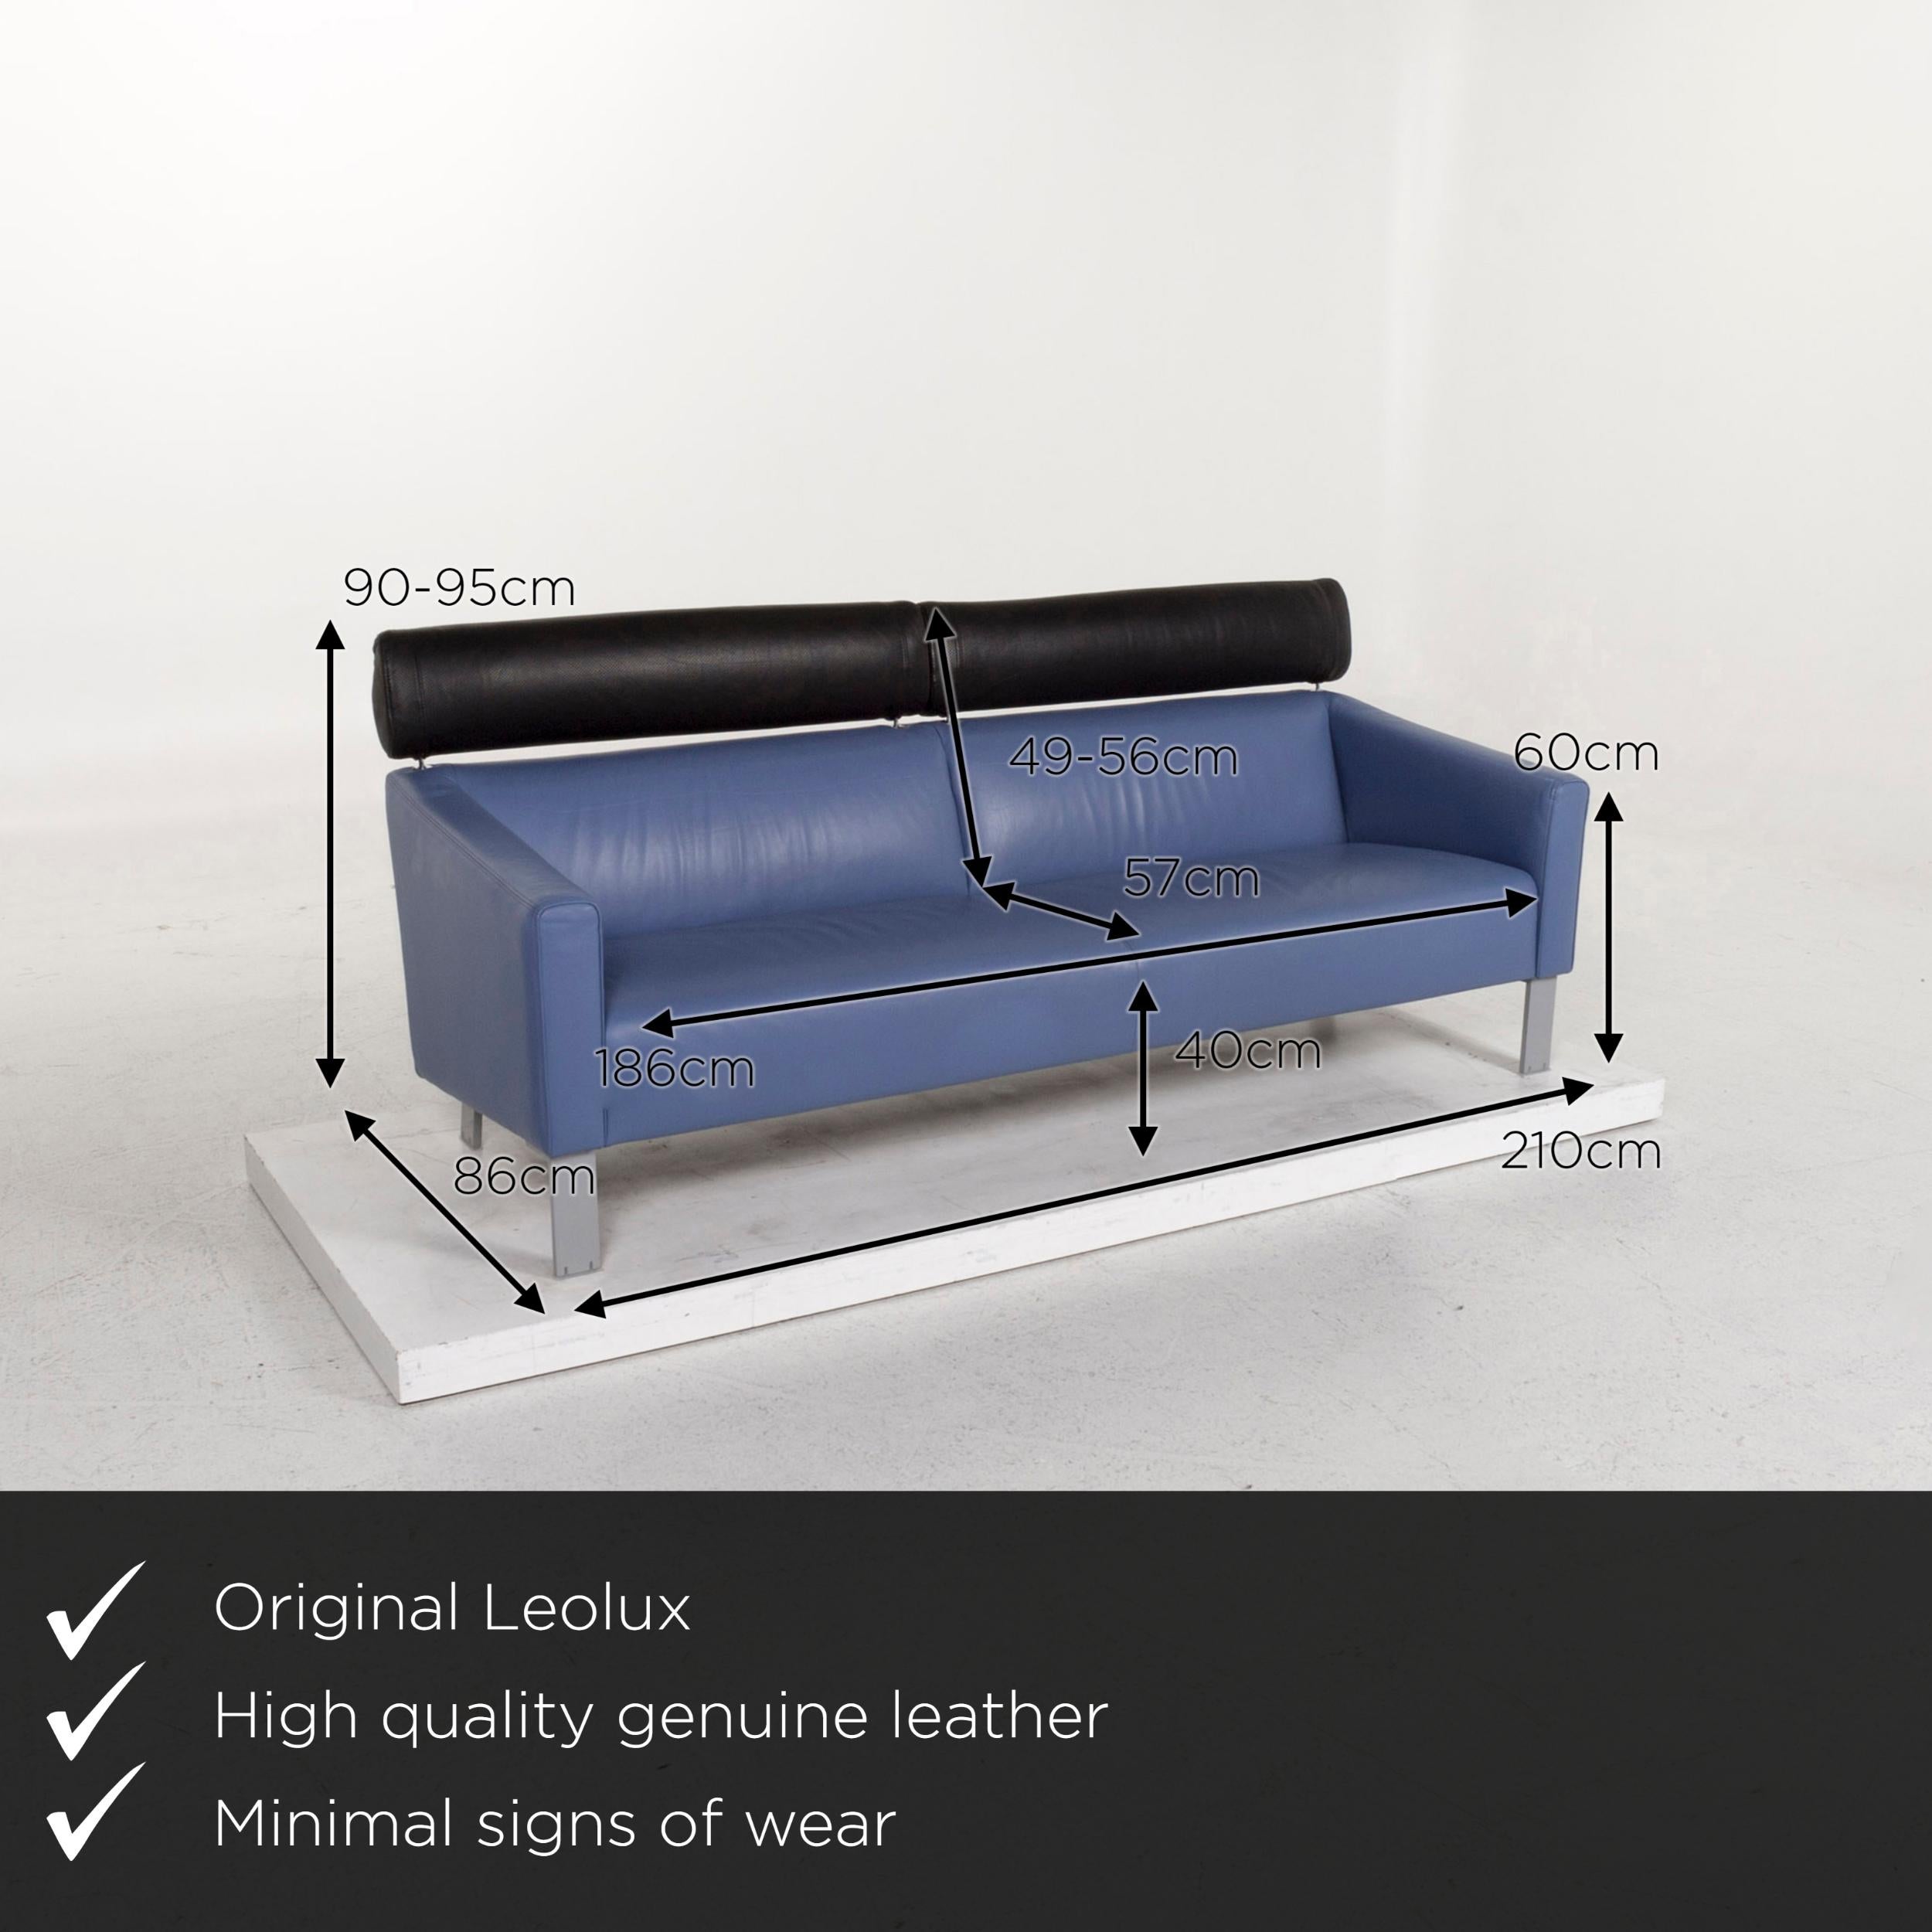 We present to you a Leolux leather sofa set blue 1 three-seat 1 two-seat couch.
   
 

 Product measurements in centimeters:
 

Depth 86
Width 210
Height 90
Seat height 40
Rest height 60
Seat depth 57
Seat width 186
Back height 49.
  